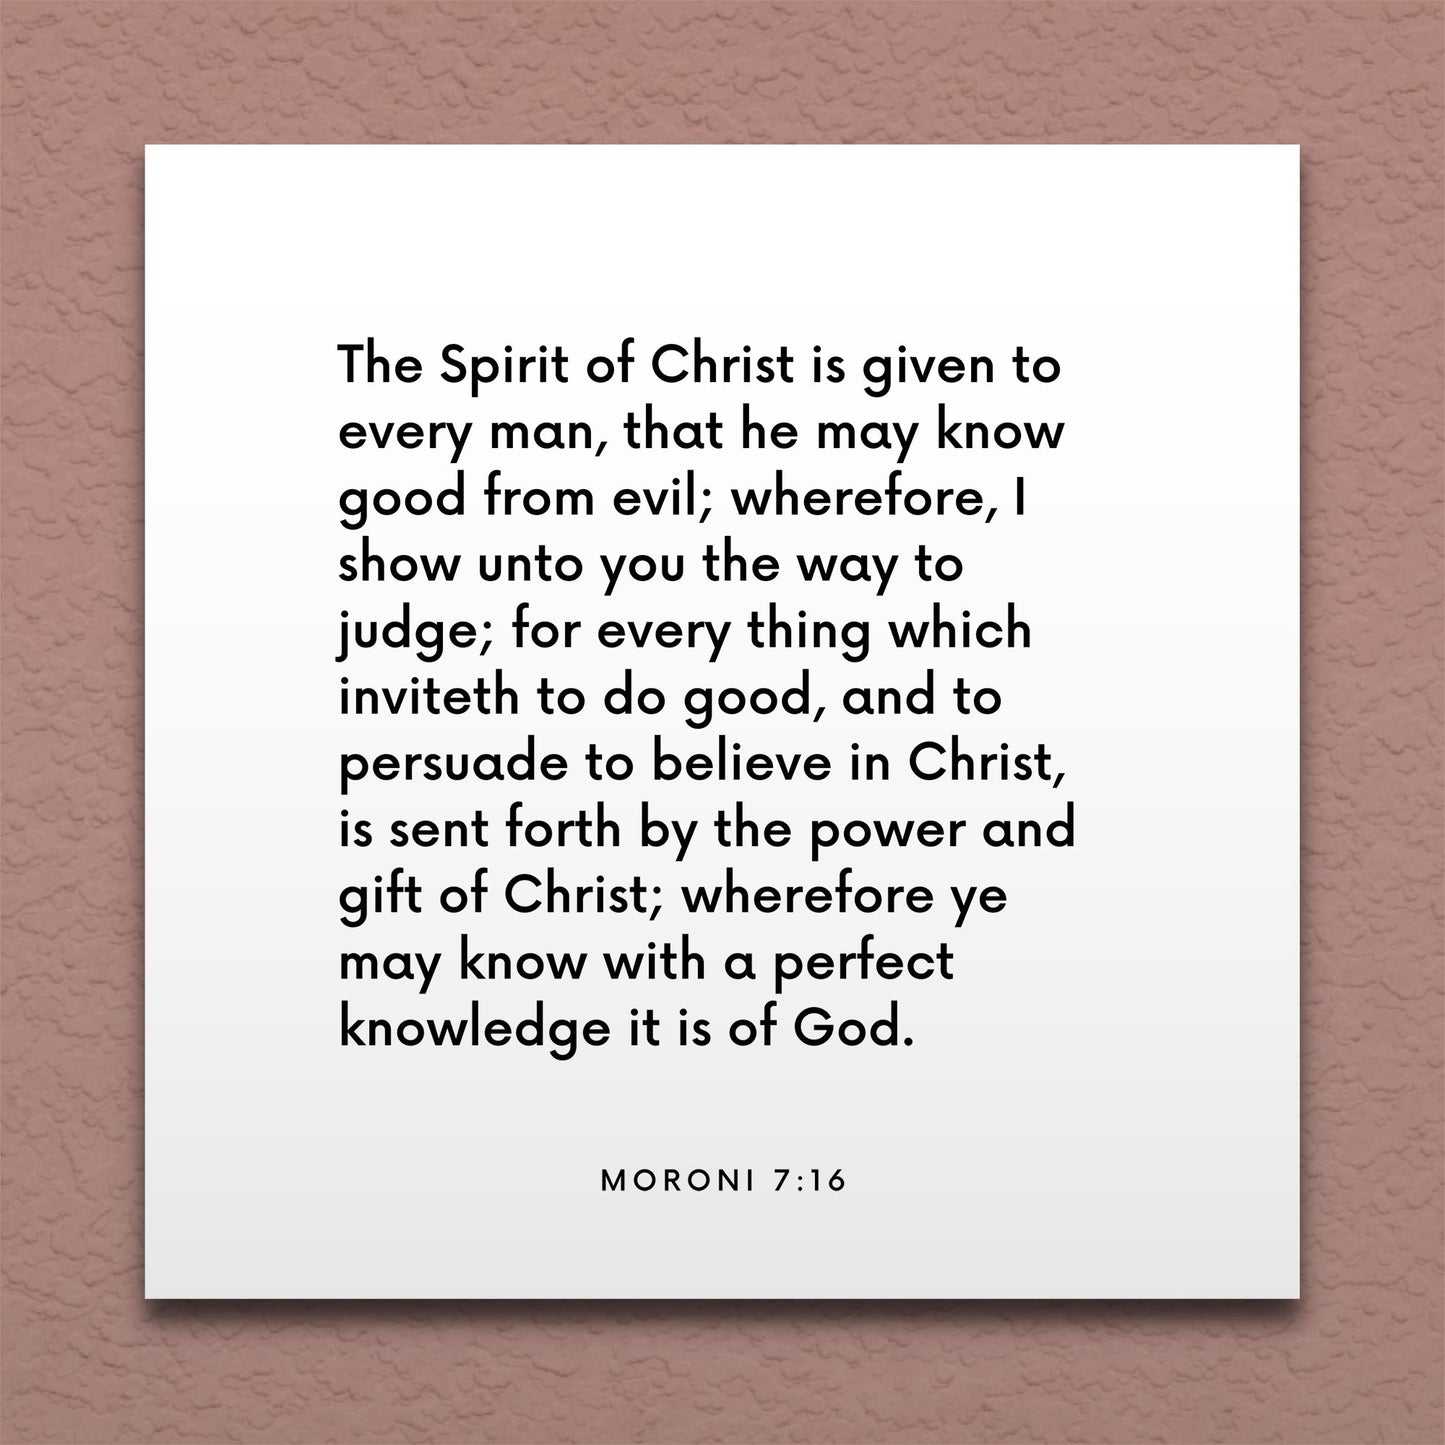 Wall-mounted scripture tile for Moroni 7:16 - "The Spirit of Christ is given to every man"